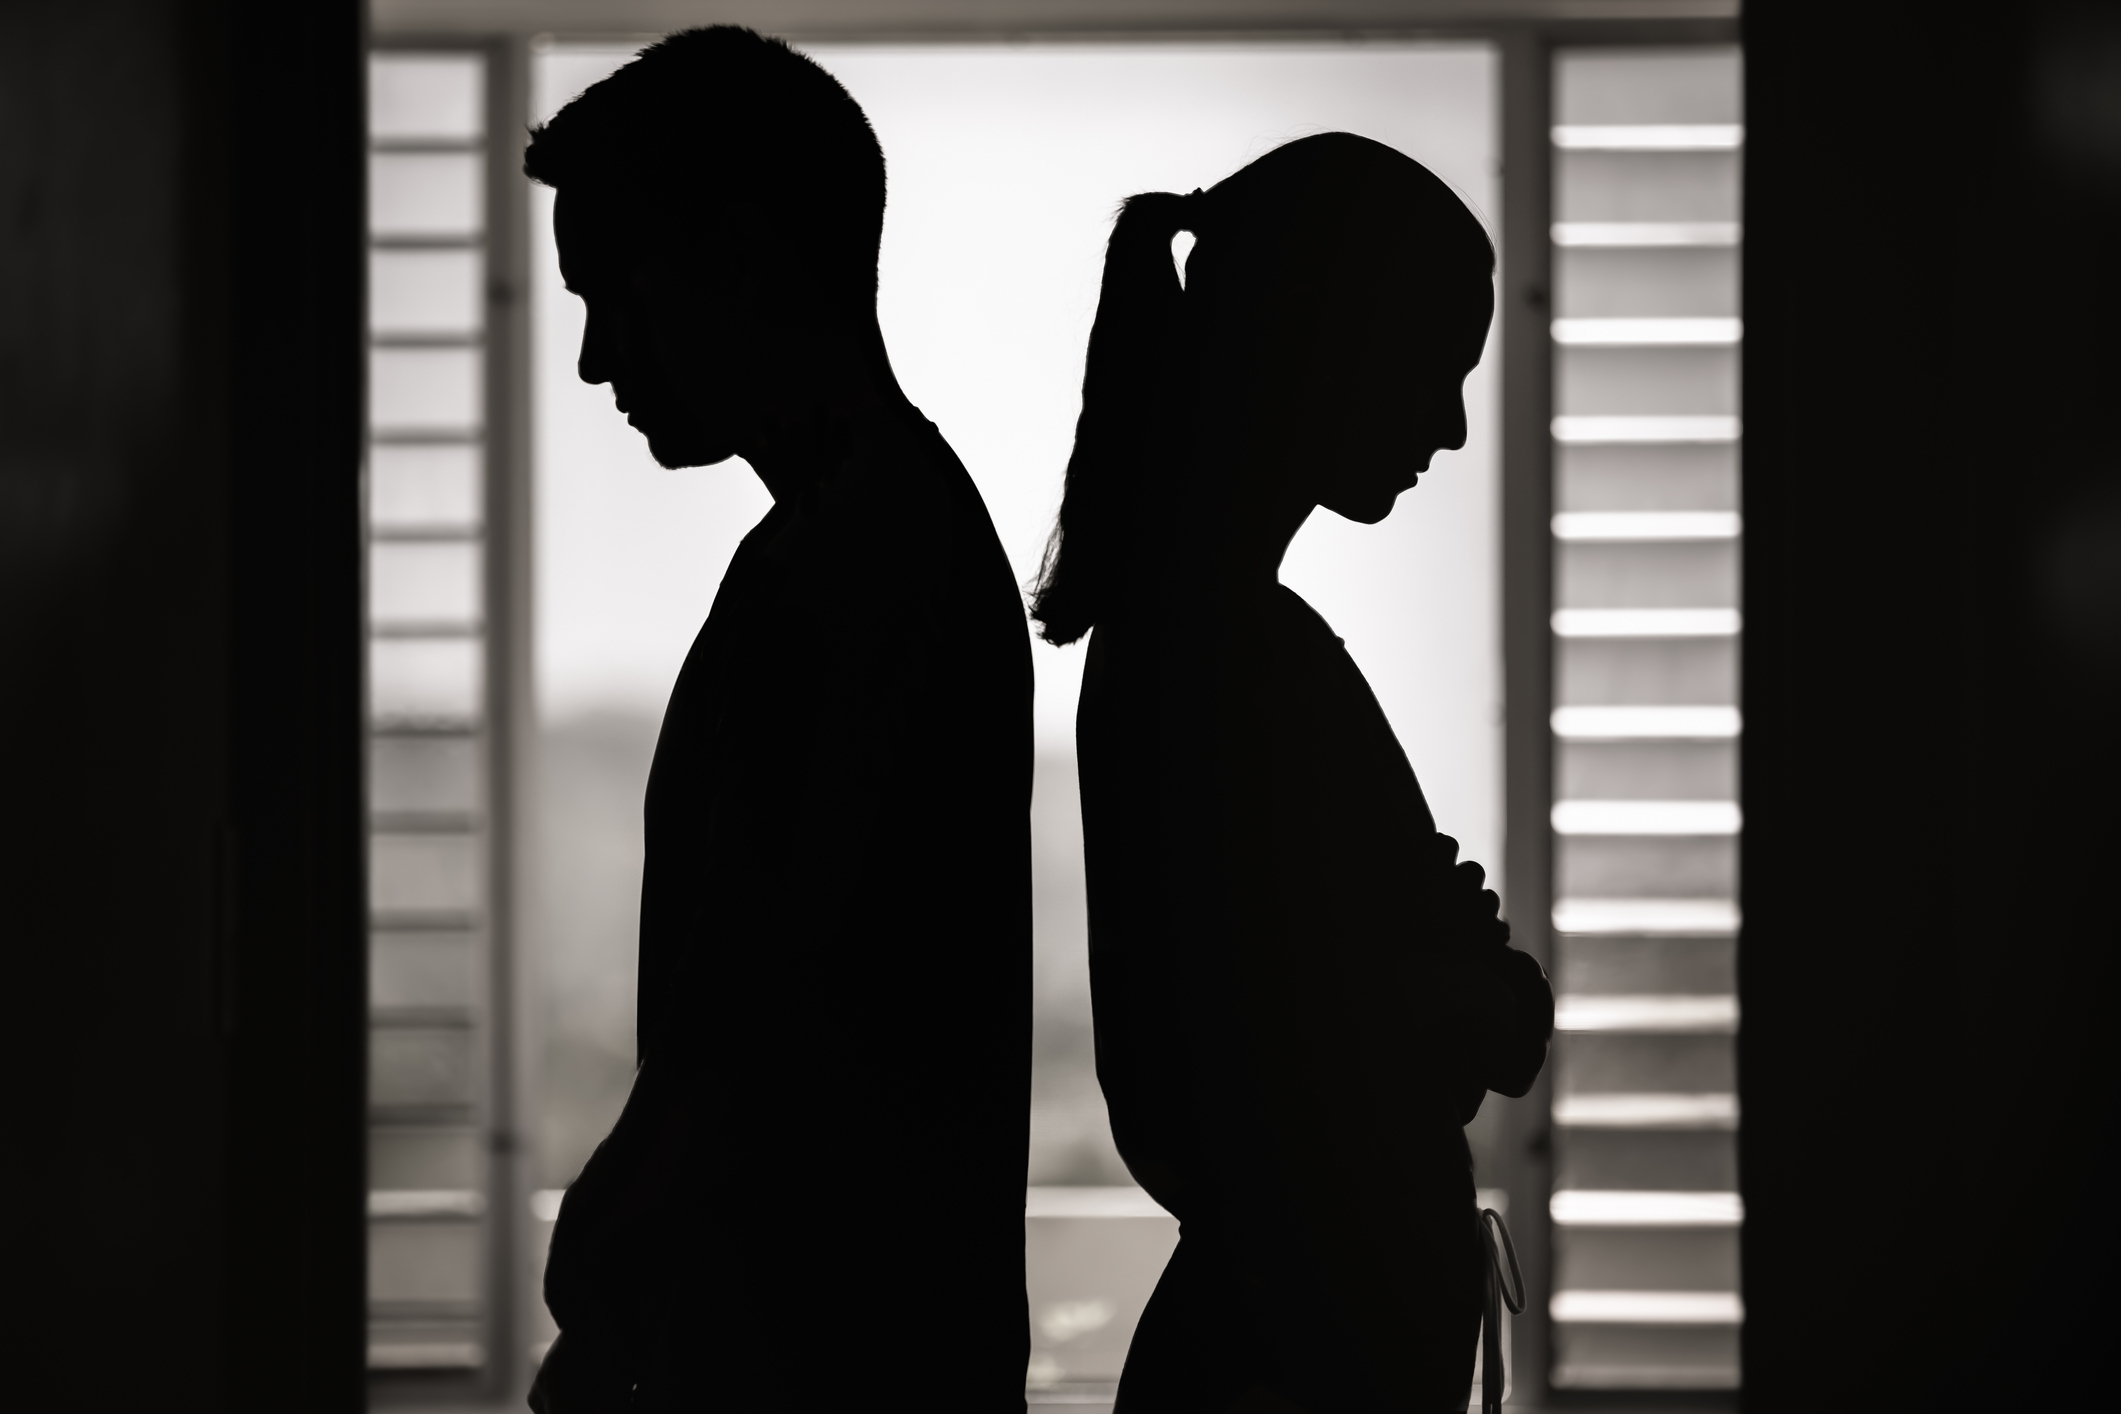 Silhouetted image of a man and woman facing away from each other with a tensioned posture